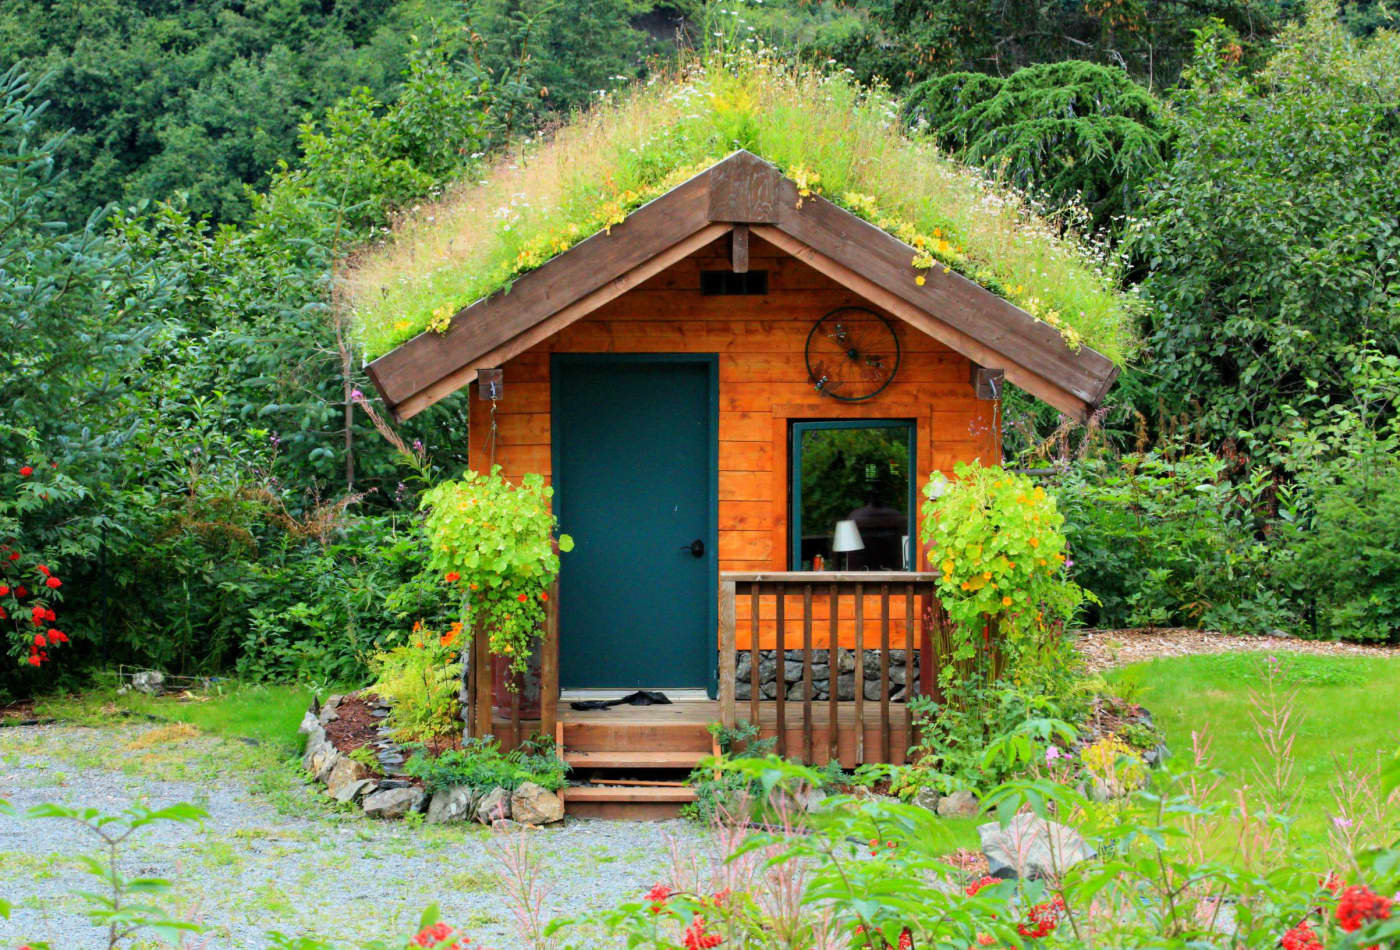 How To Win A Tiny House Worth 100 000 Through A Nonprofit